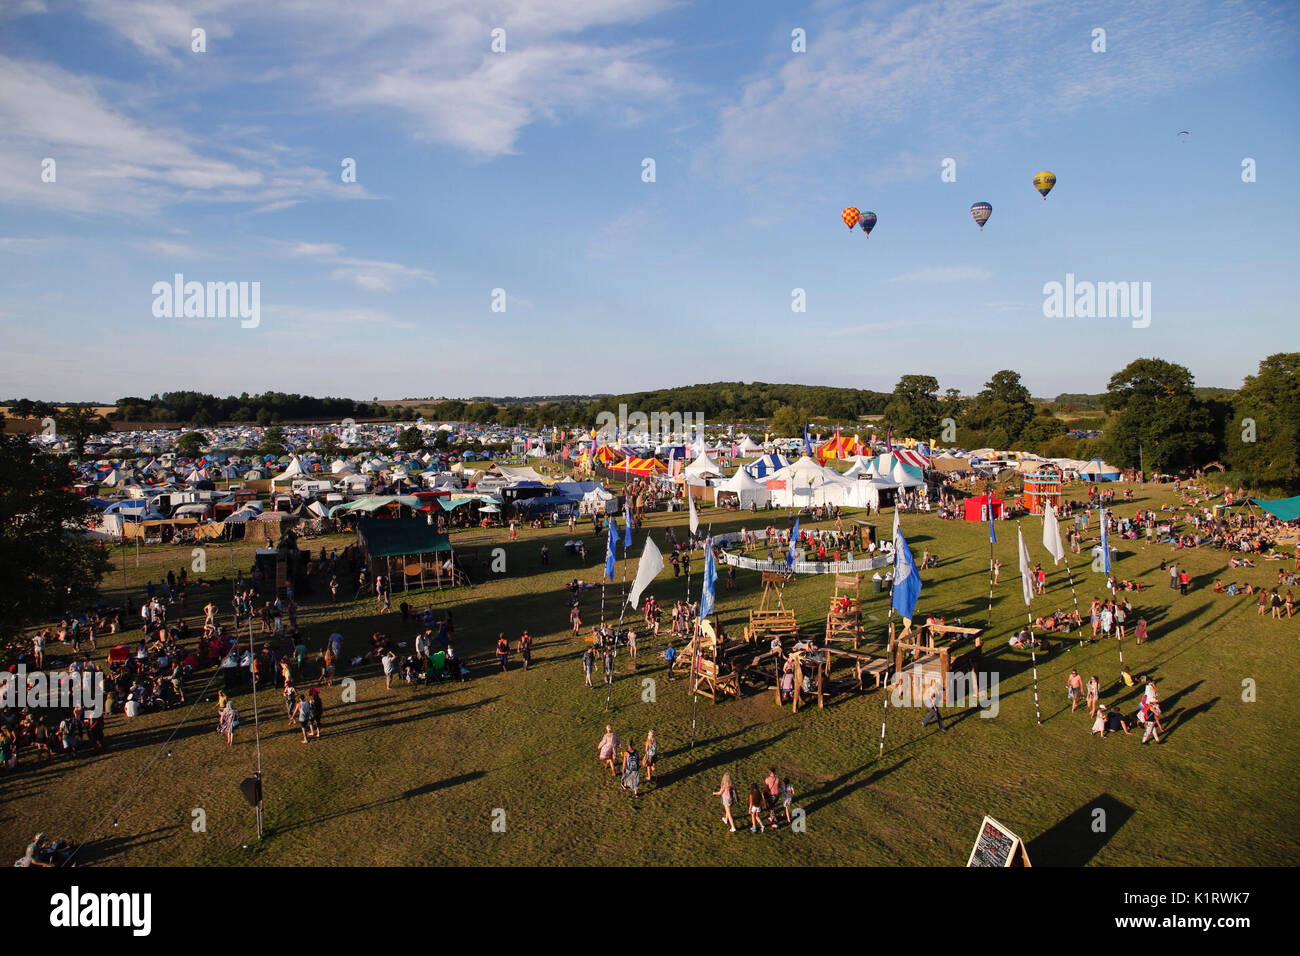 Northampton, UK. 27th August, 2017. 27th August 2017. Shambala festival, Northampton. Last day at the alternative festival famed for authentic music, crazy fancy dress and enthusiastic energy. Festival goers bask in the hot sunshine as temperatures continue to soar over rhe bank holiday weekend on the Kelmarsh Estate. Credit: Wayne Farrell/Alamy Live News Stock Photo